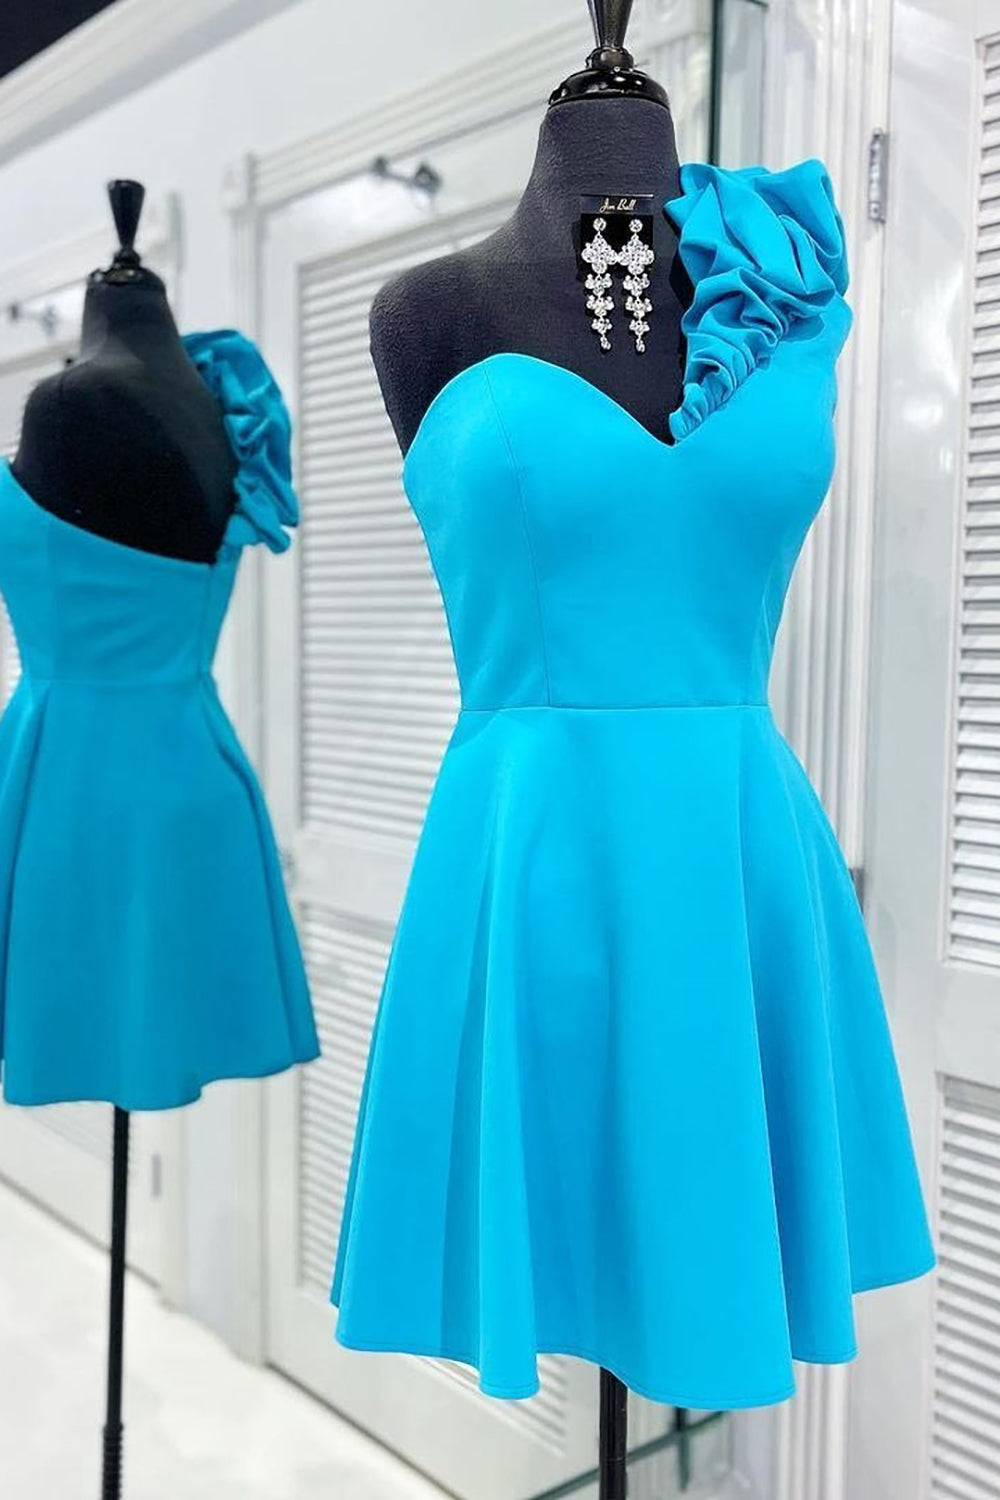 A Line One Shoulder Blue Short Corset Homecoming Dress outfit, Homecoming Dress Shops Near Me